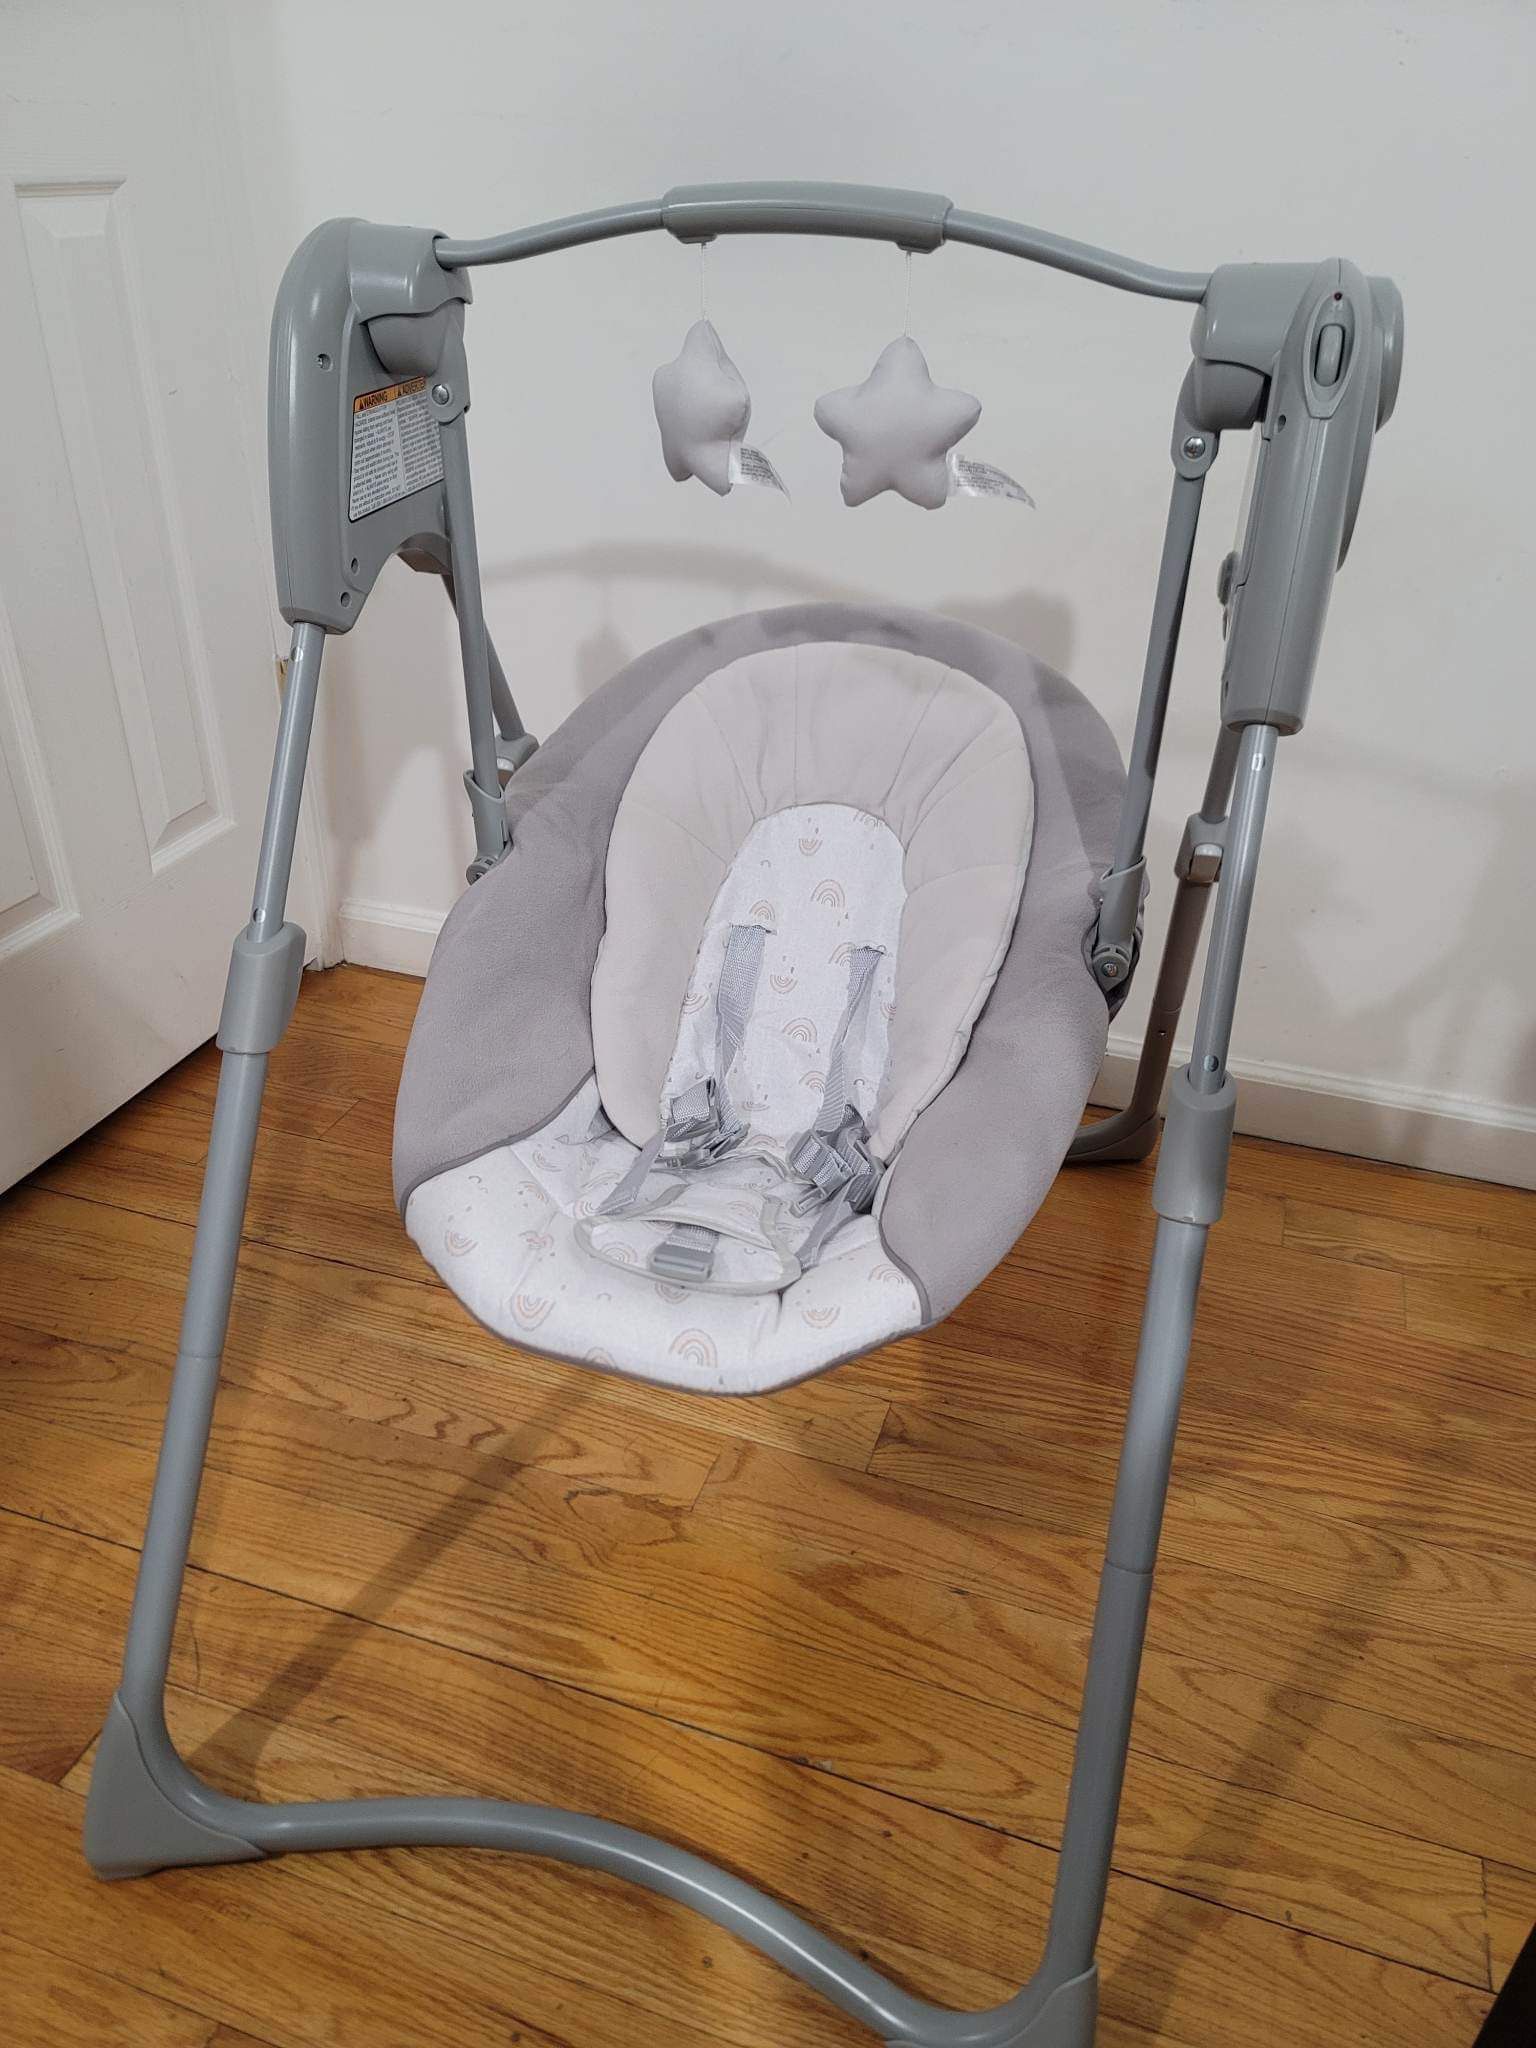 Graco Slim Spaces Compact Baby Swing - Humphry